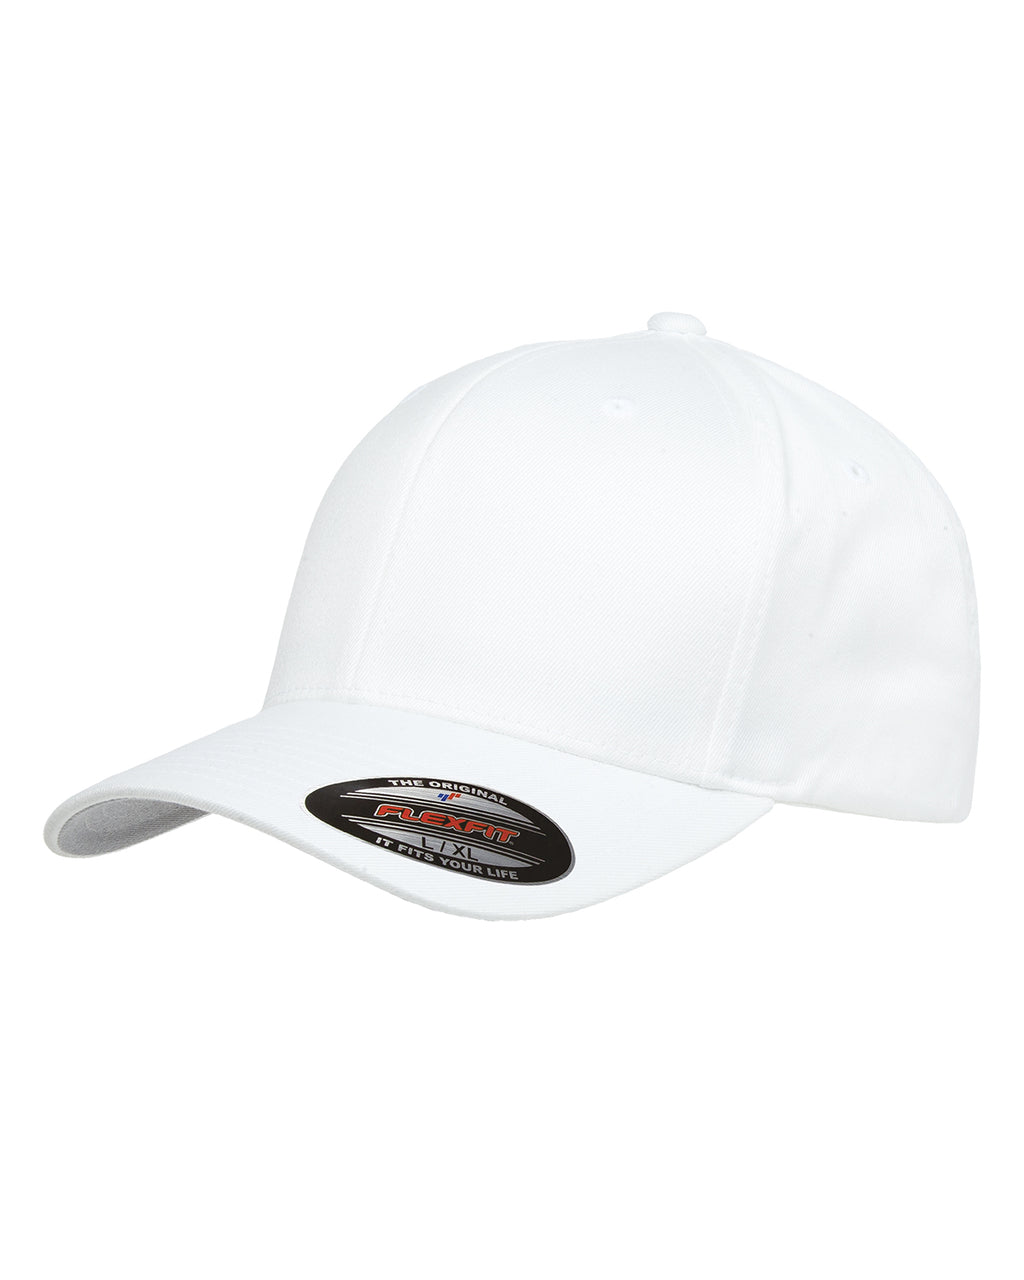 EMS Star of Life Flexfit Hat - Firefighter Clothing & Accessories